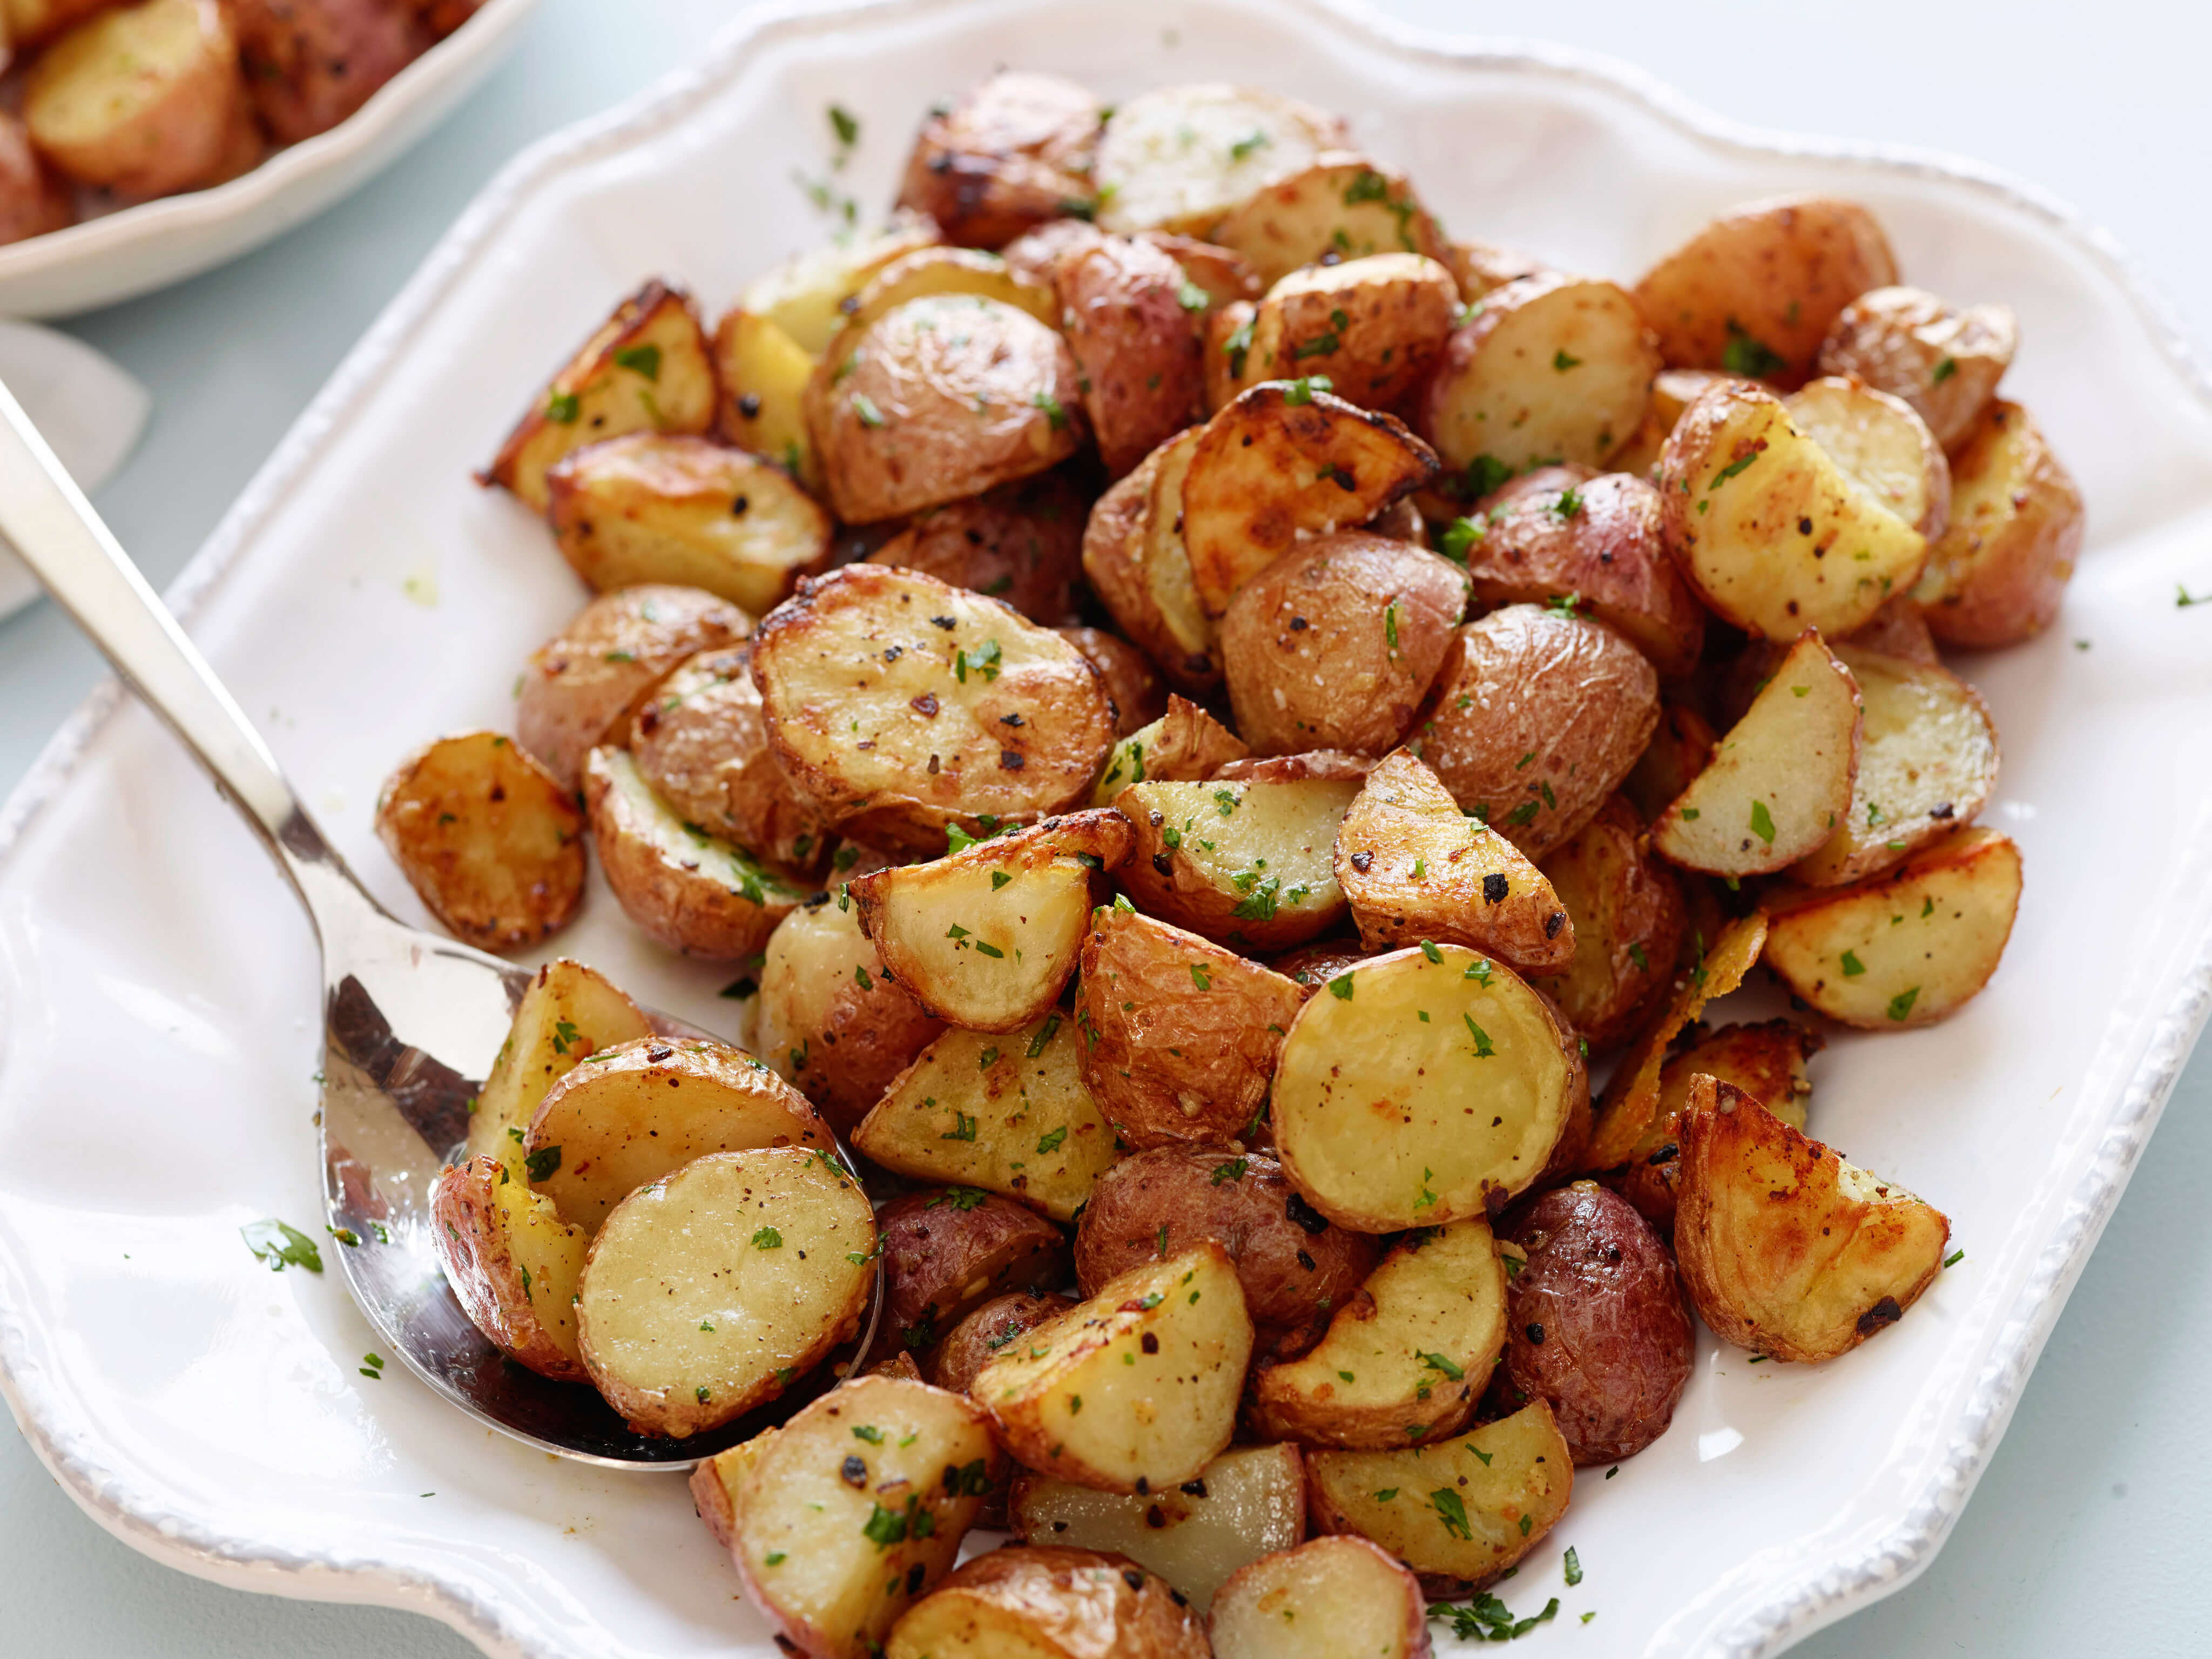 Christmas dinner isn't complete without roast potatoes